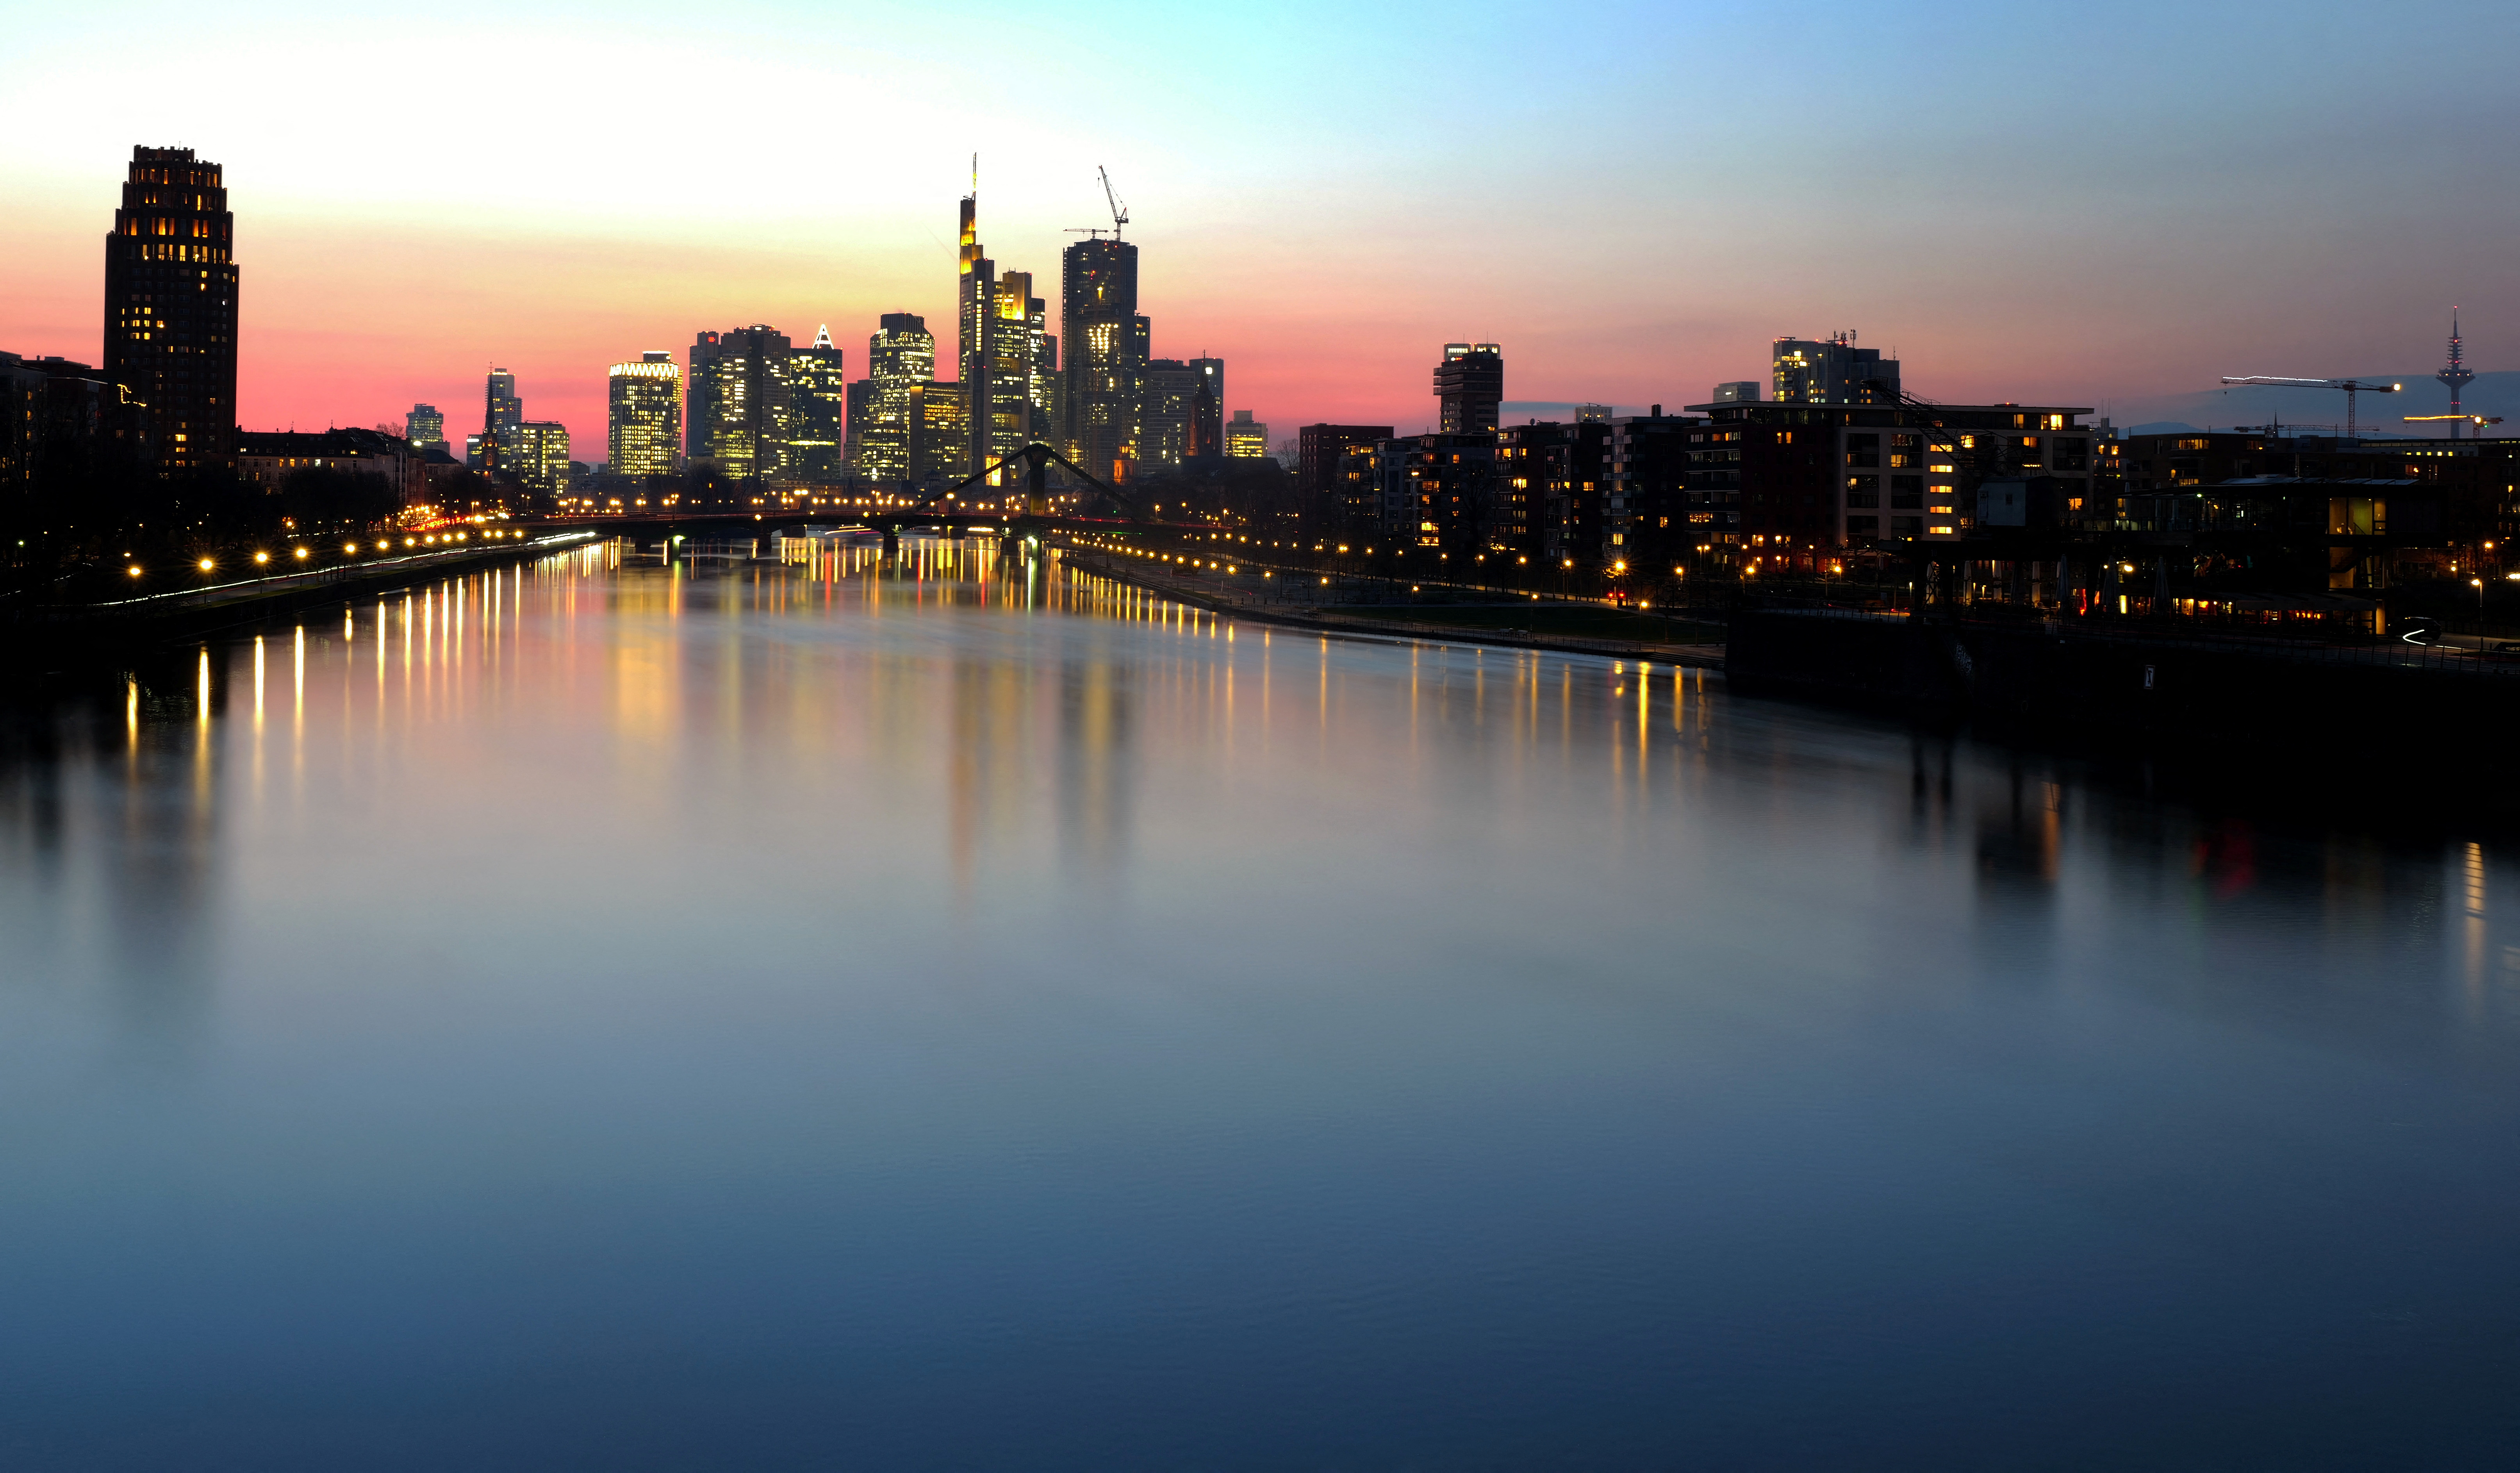 The skyline with the banking district is seen during sunset in Frankfurt